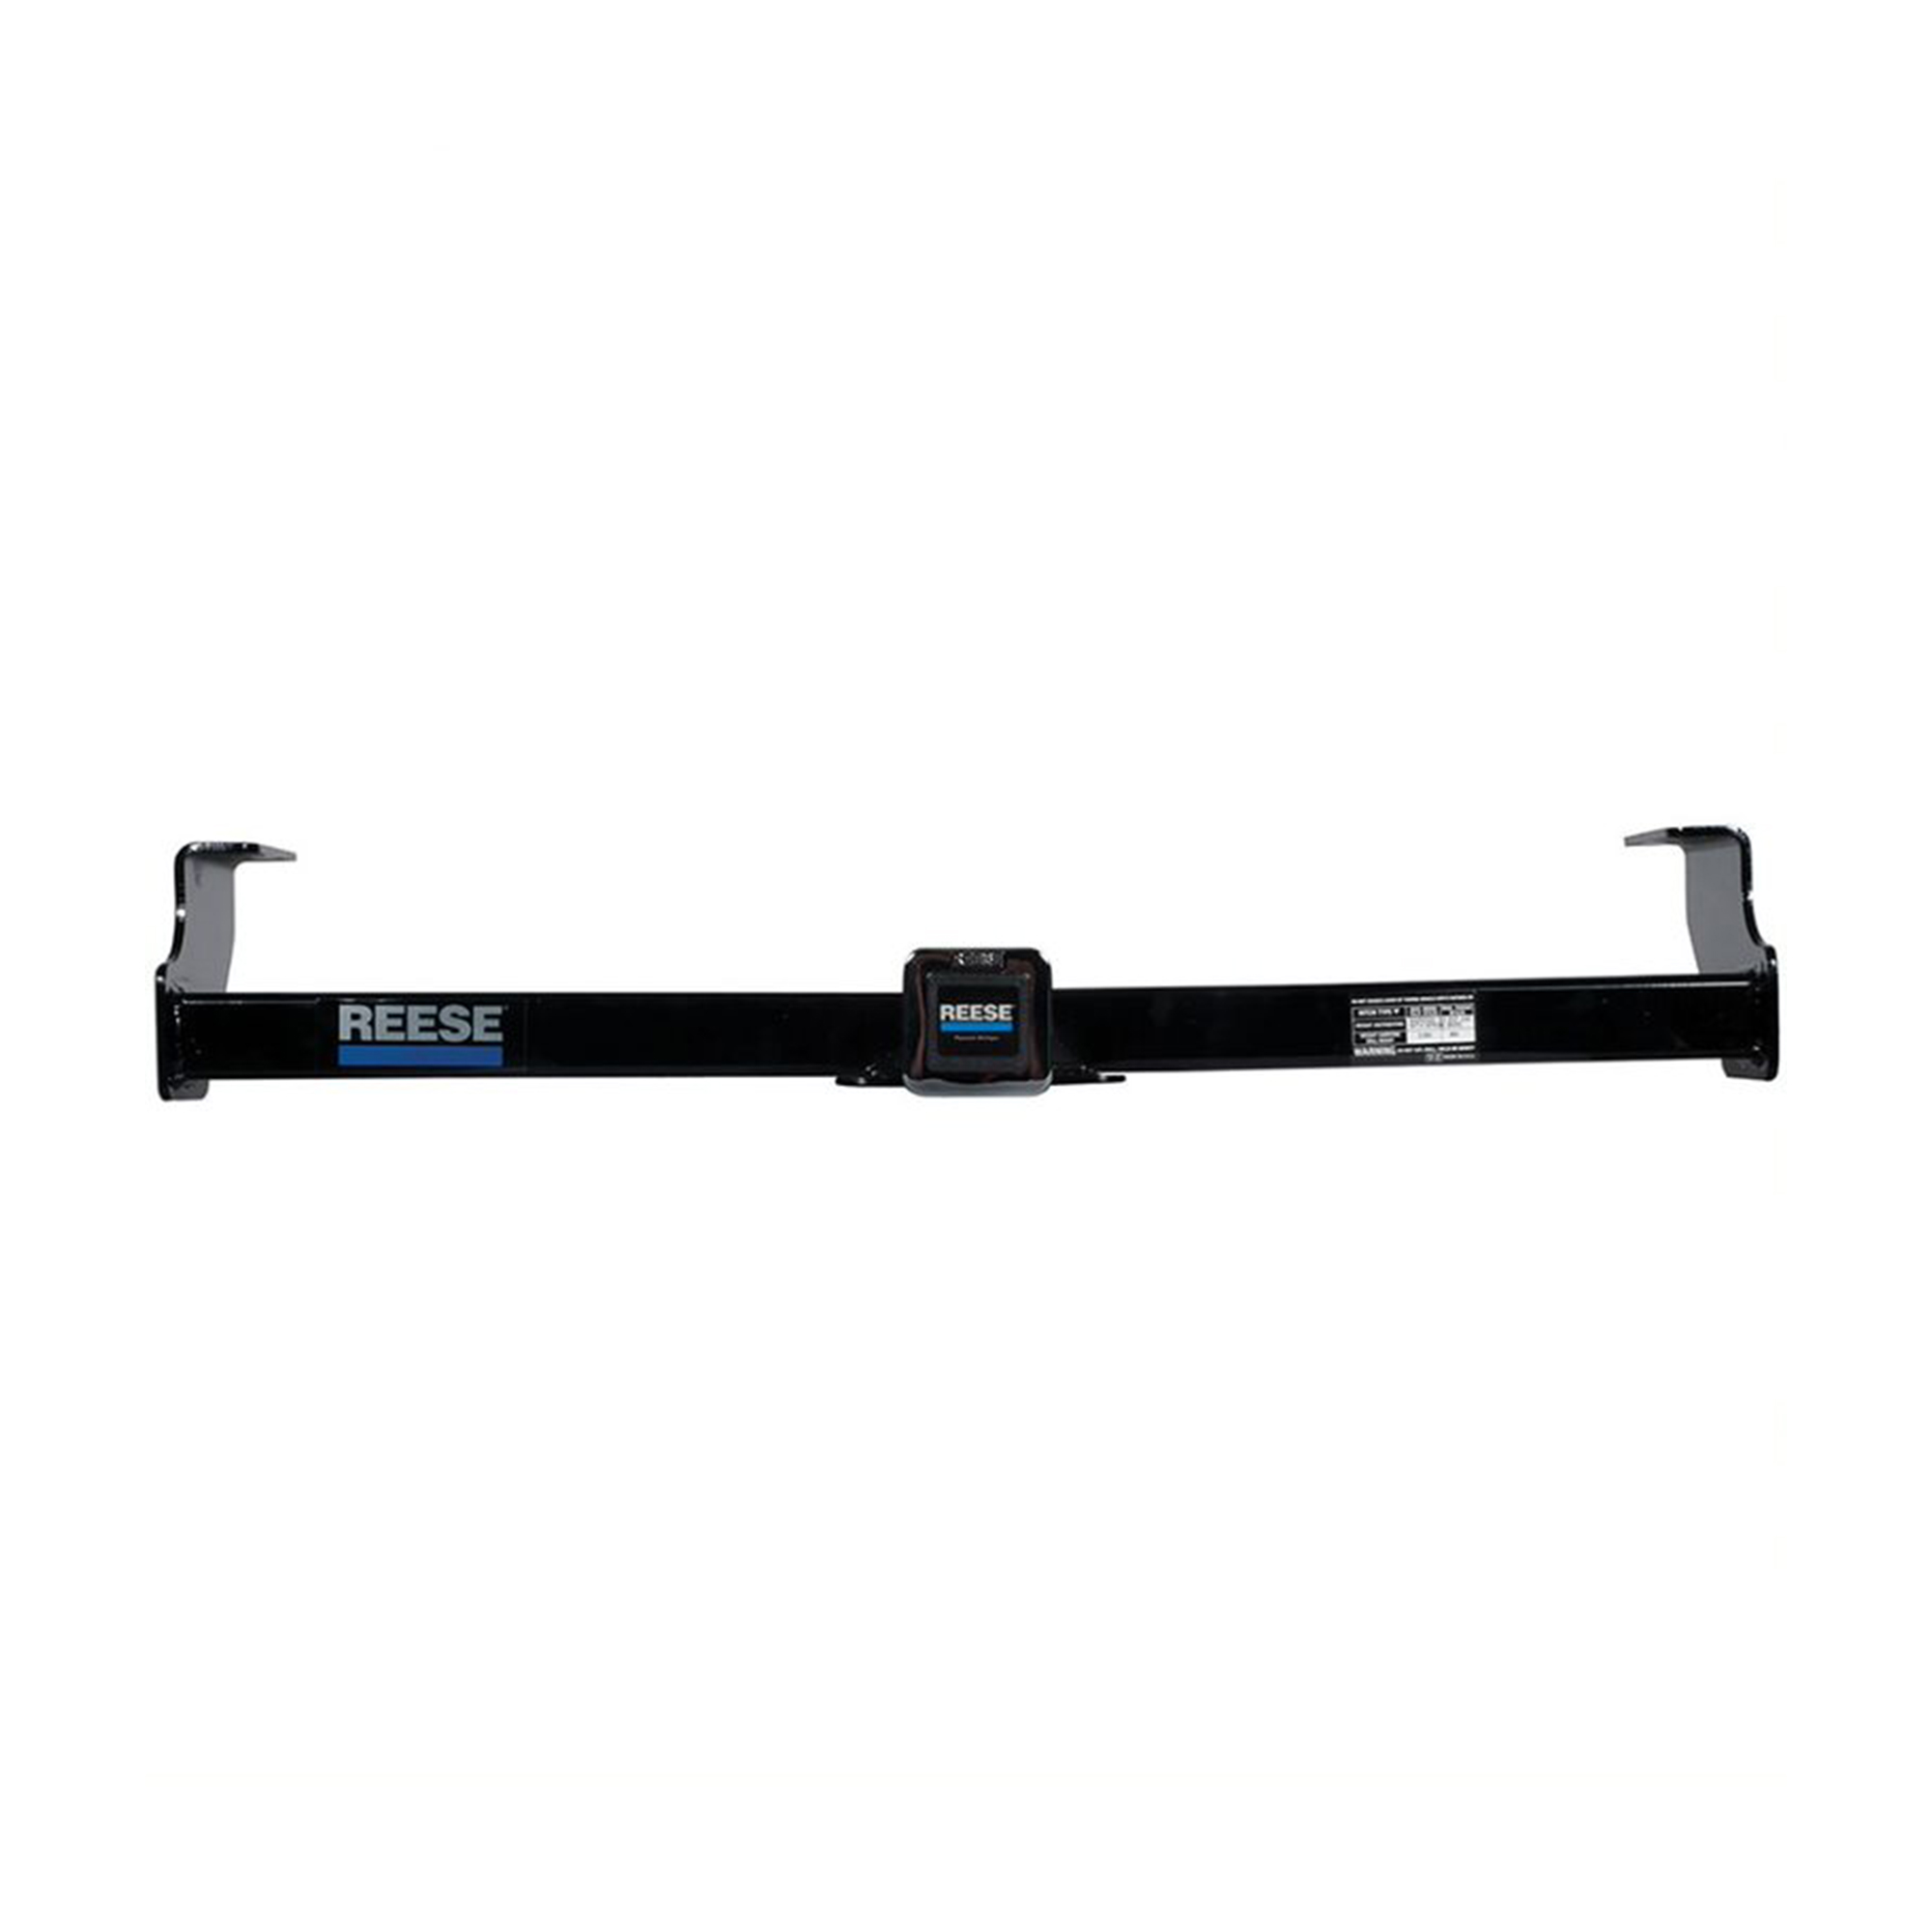 Reese Towpower Class III Max Frame Trailer Tow Hitch w/ 2 In Receiver Tube - image 3 of 9